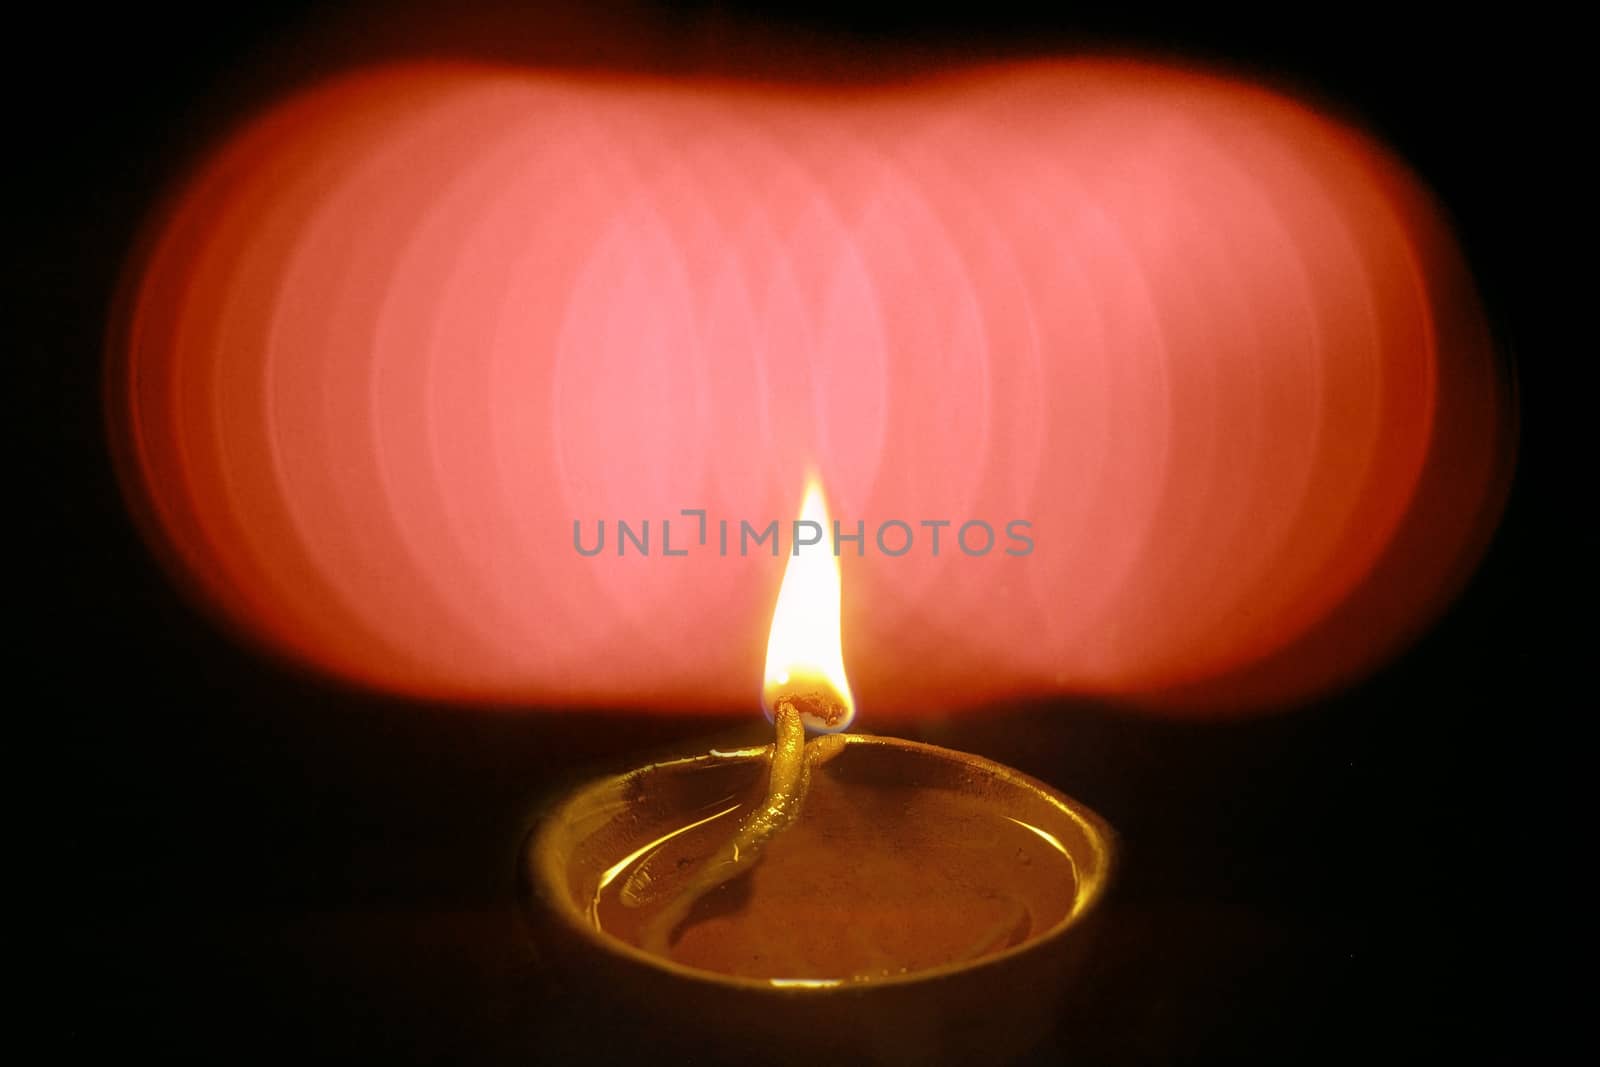 Oil Lamp in Diwali Festival, India. Diwali or Divali also known as Deepavali and the "festival of lights", is an ancient Hindu festival celebrated in autumn every year. The festival spiritually signifies the victory of light over darkness, knowledge over ignorance, good over evil, and hope over despair.